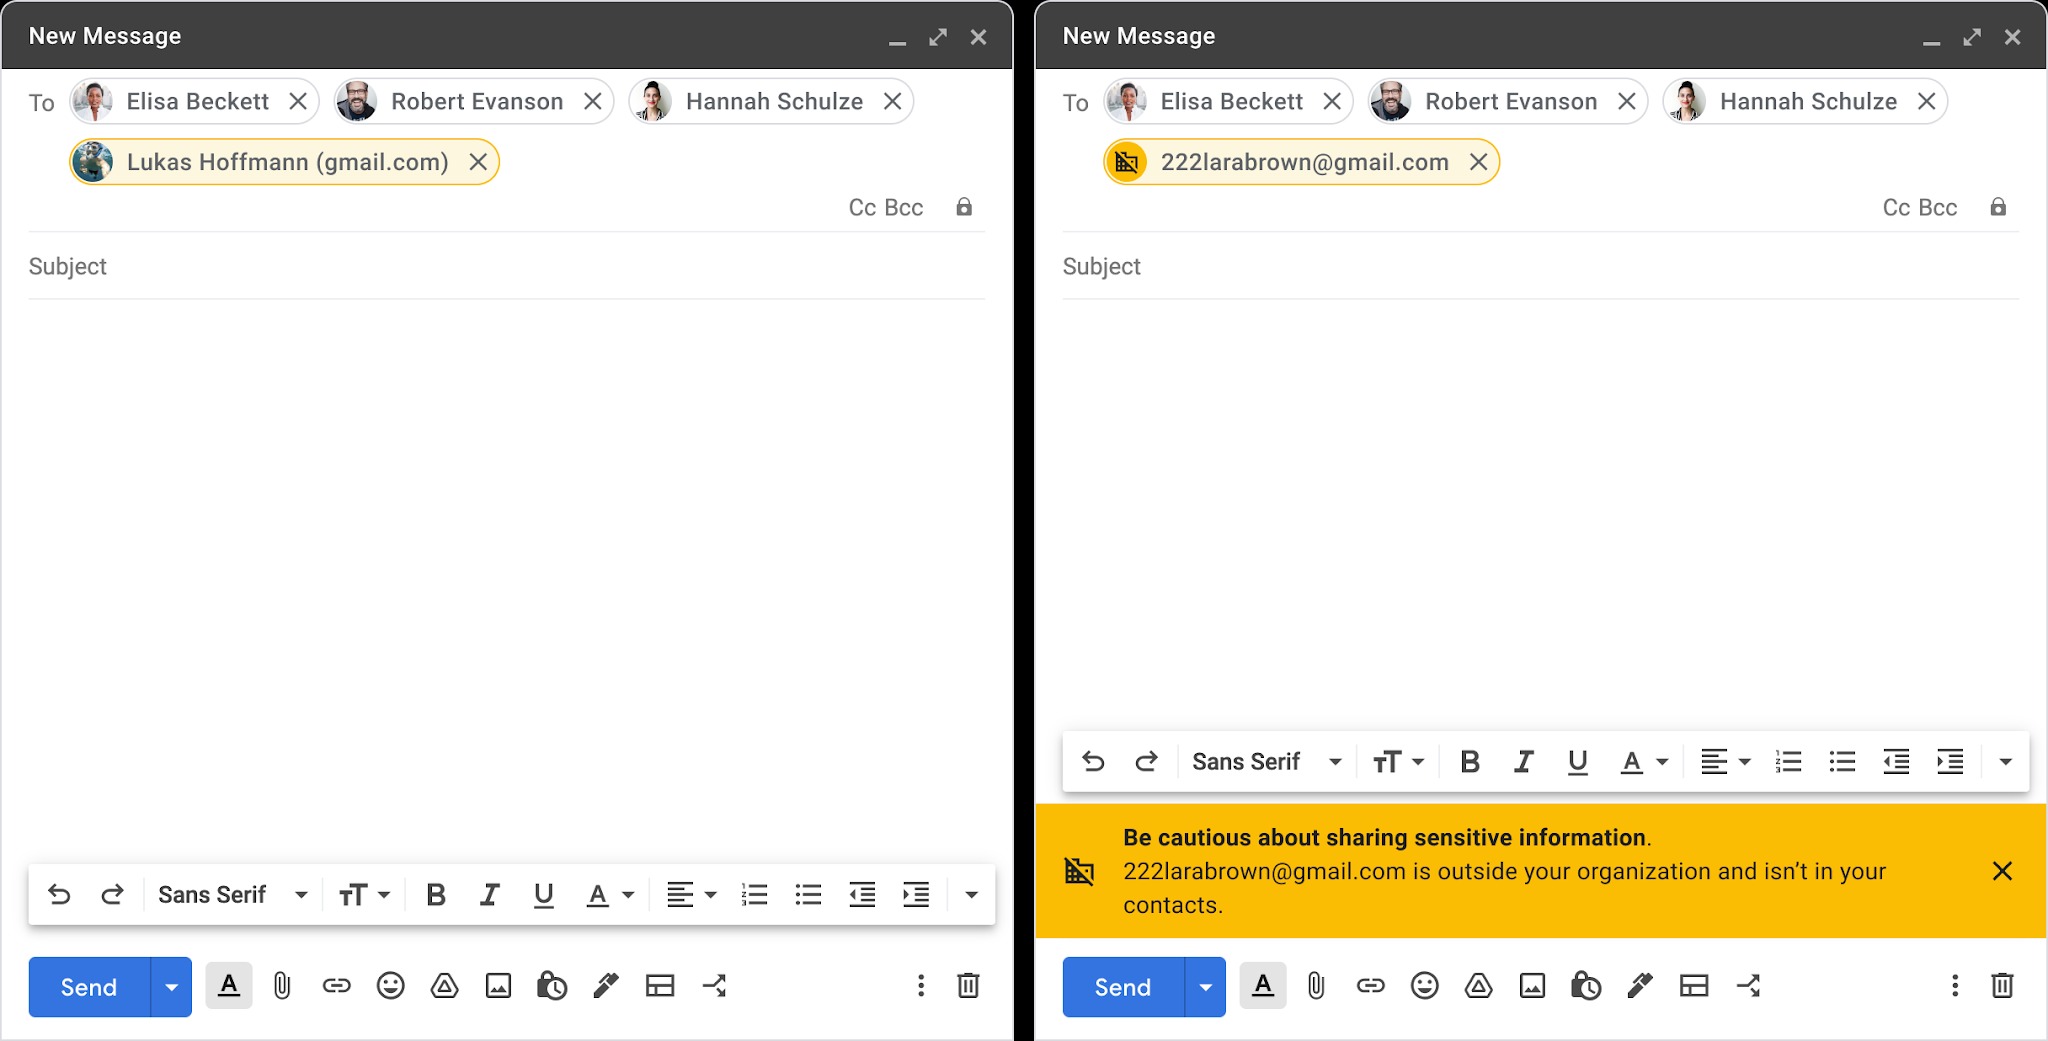 Gmail's visual updates for the recipient field